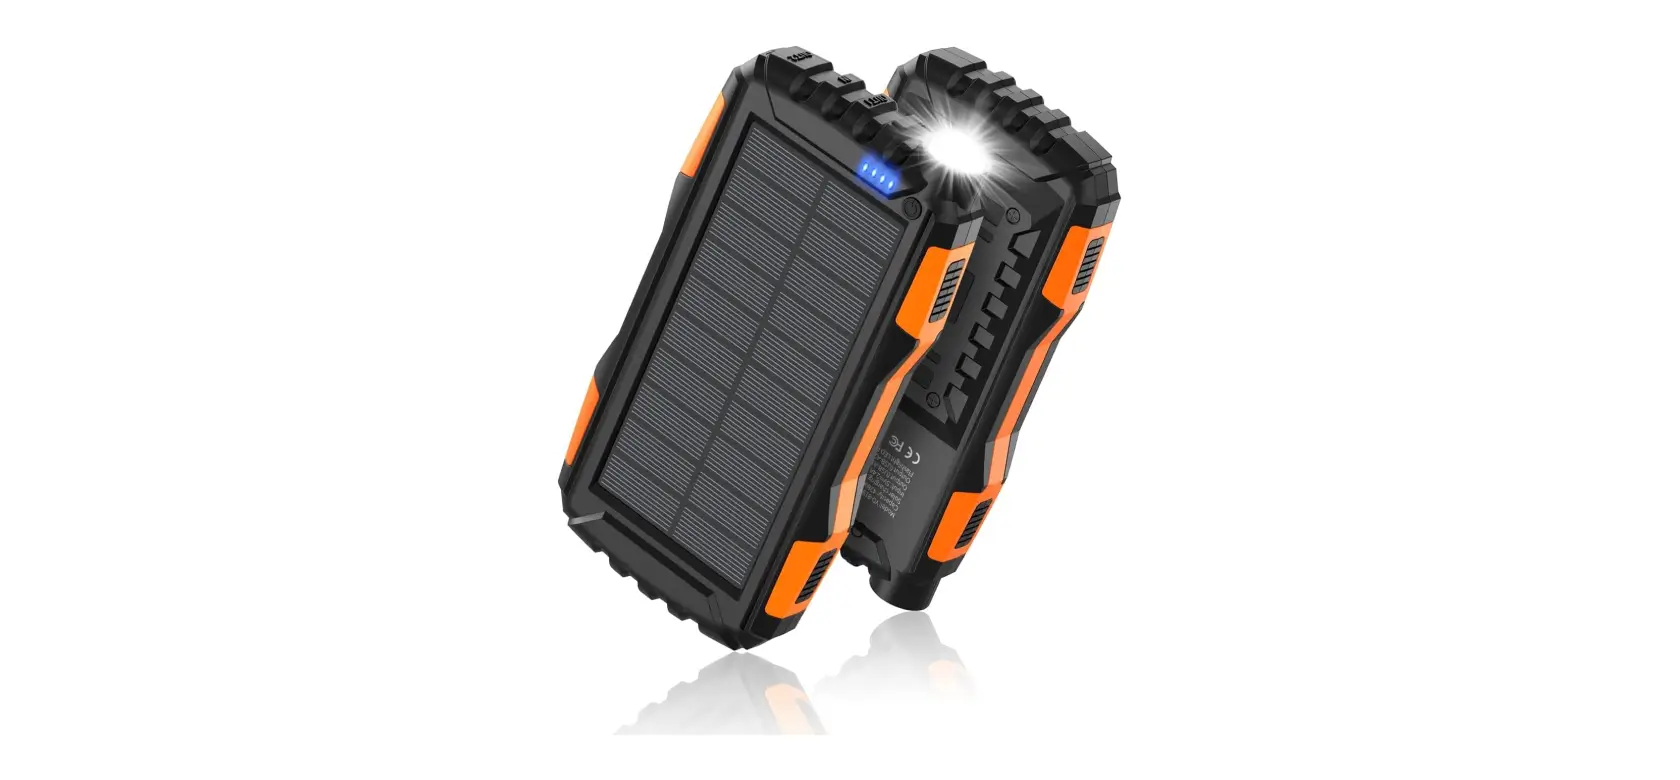 Power Bank Solar Charger Rv